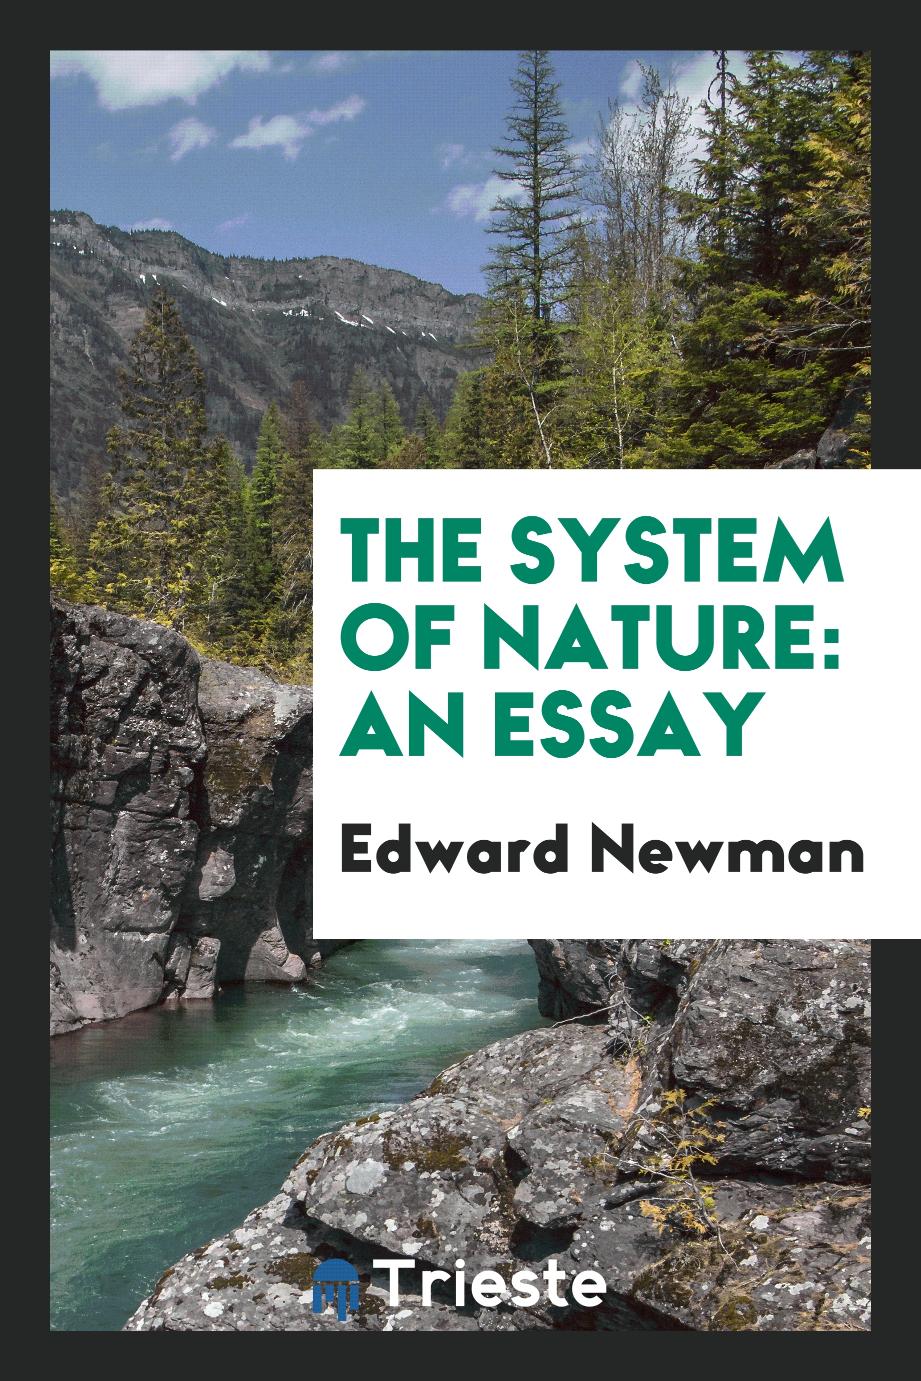 The System of Nature: An Essay